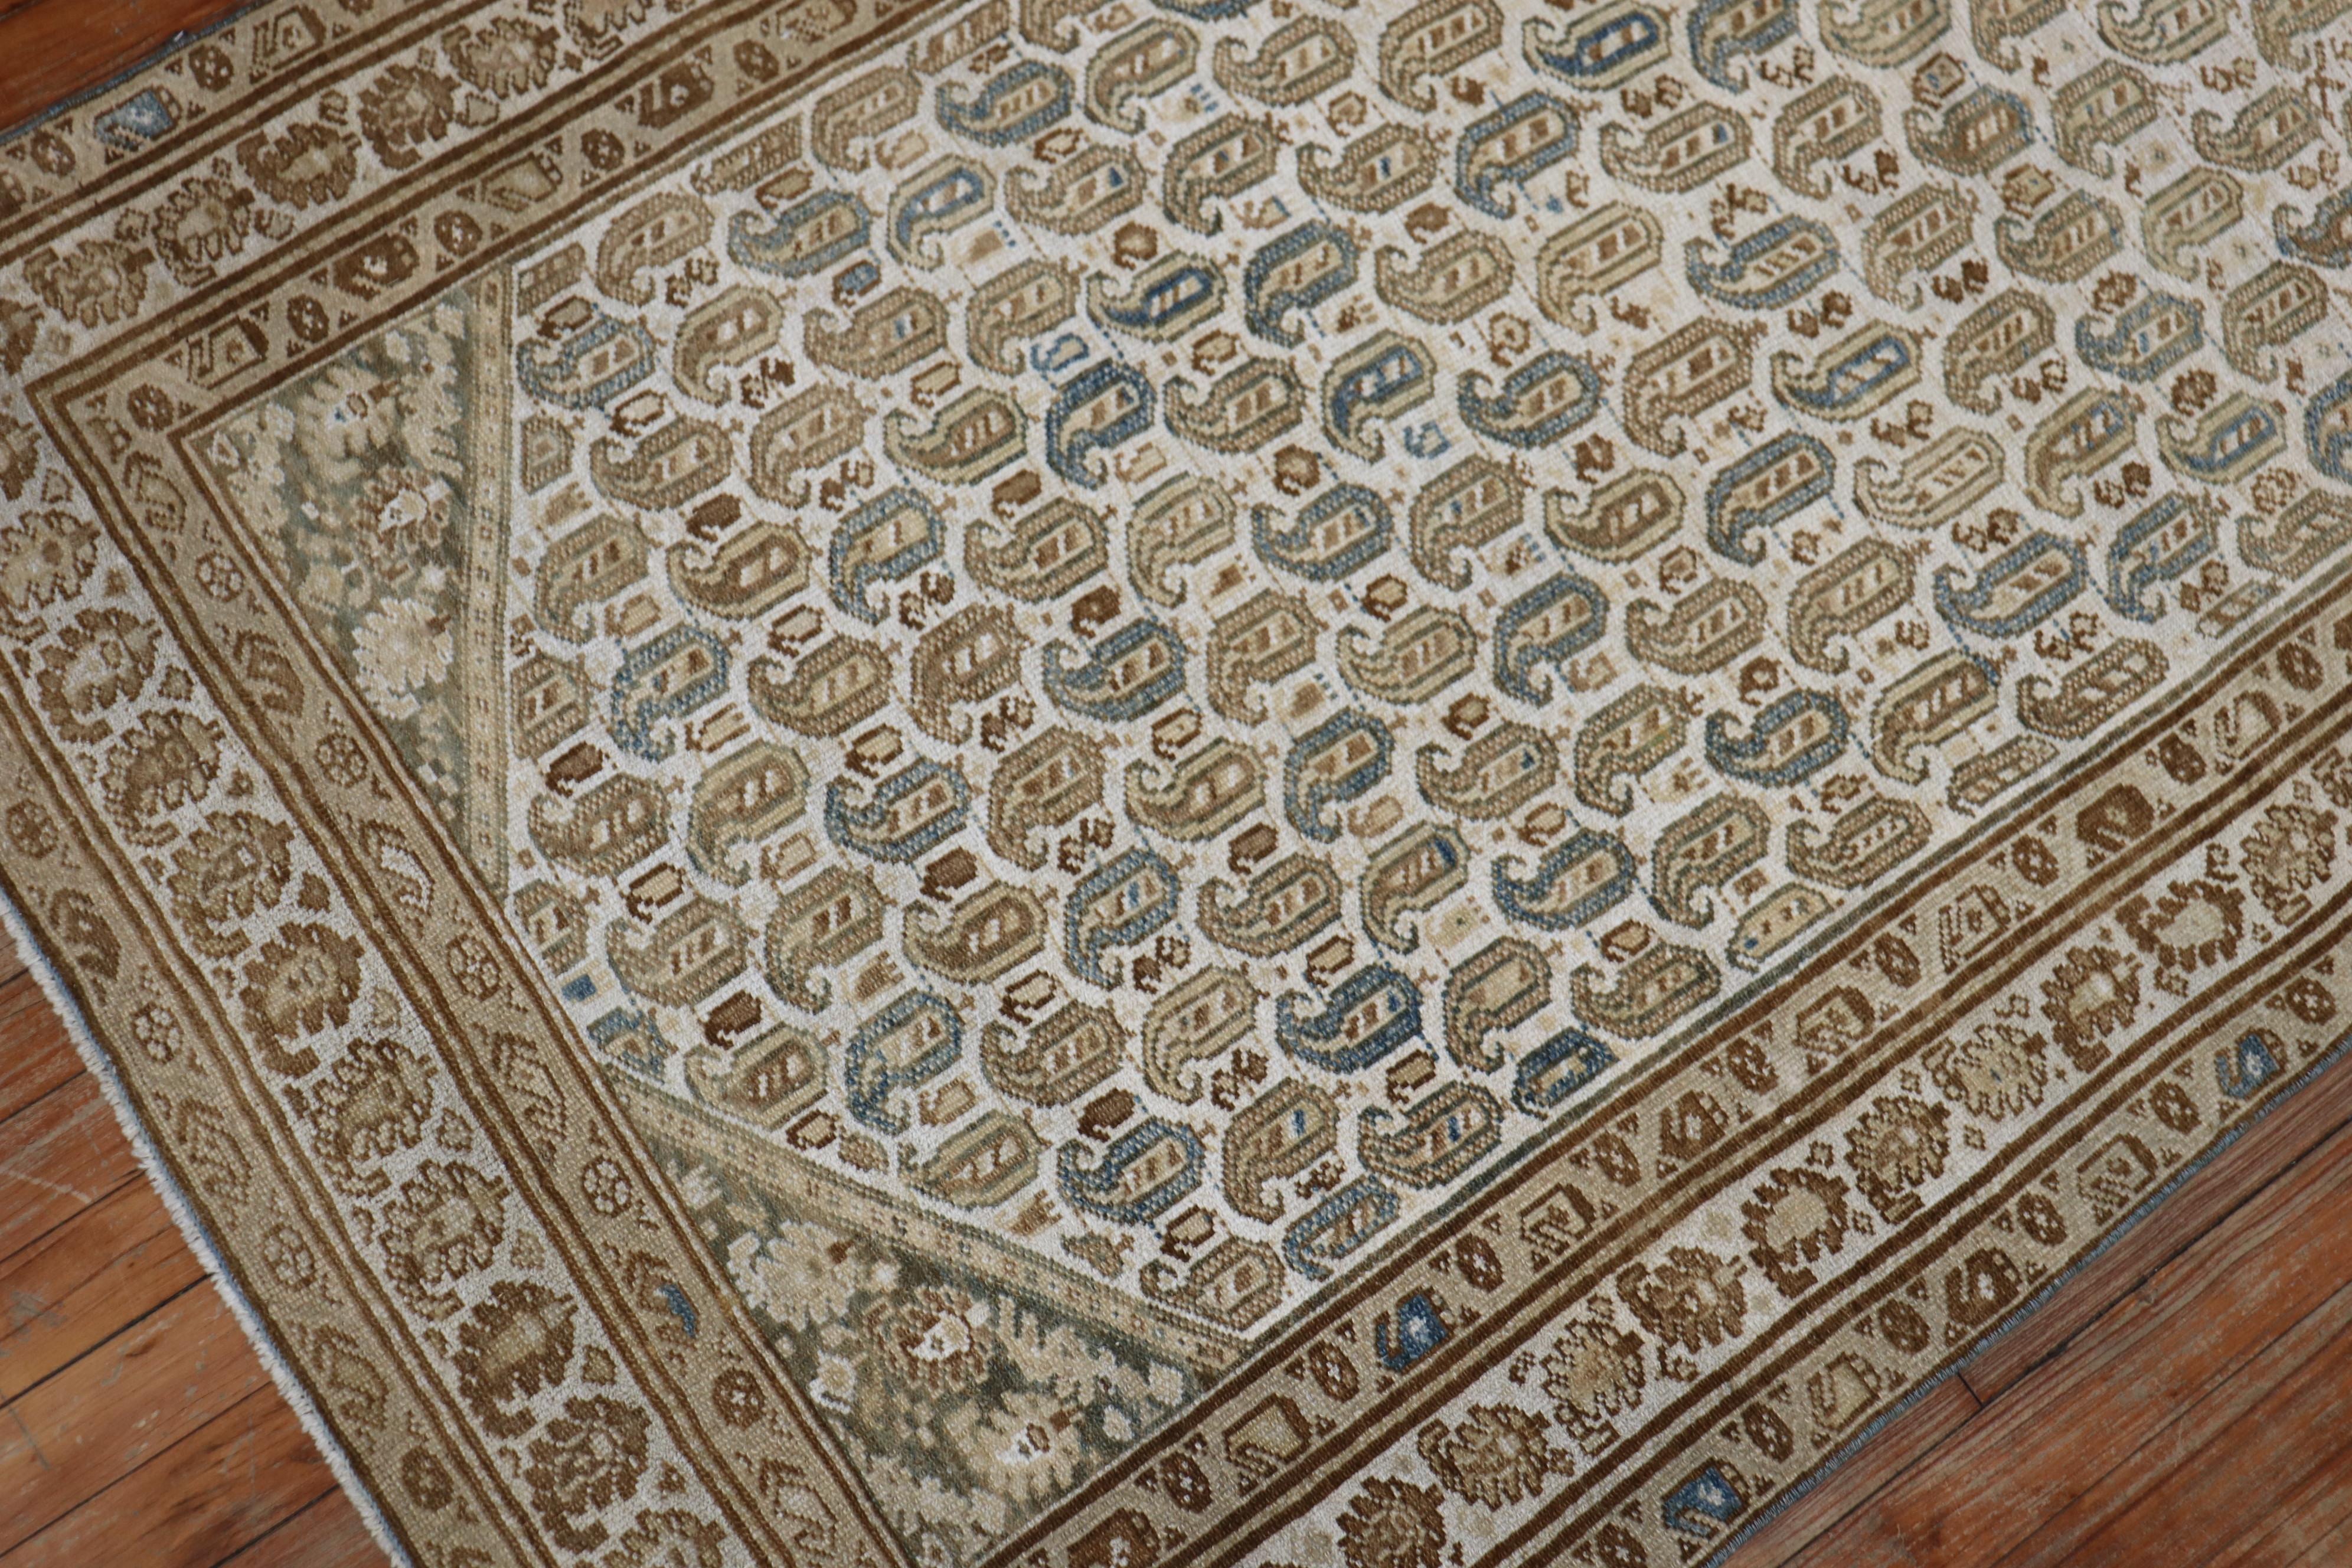 Persian Paisley Malayer Rug in Clear White Blue Brown Hues For Sale